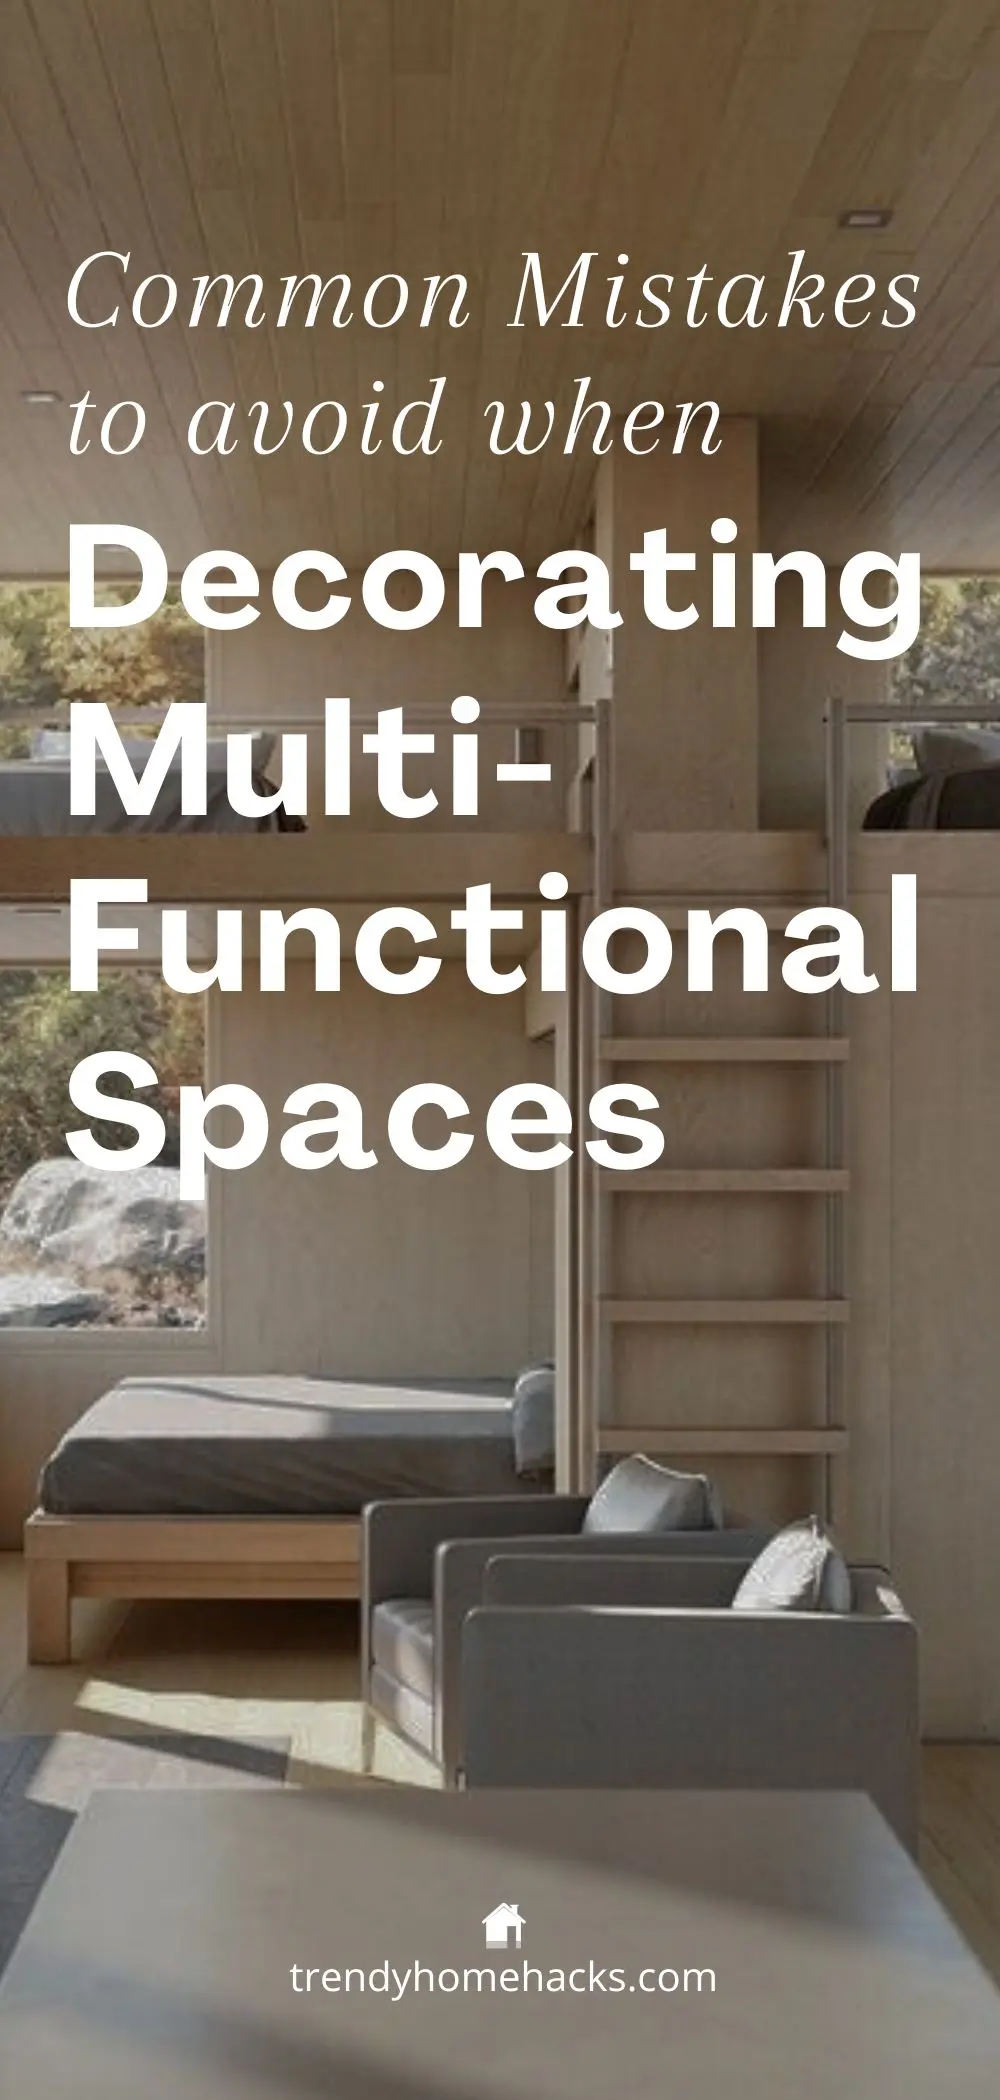 How to avoid common mistakes when decorating multi-functional spaces text overlay on a dark background image makes it perfect to share this Pinterest pin image on social media.